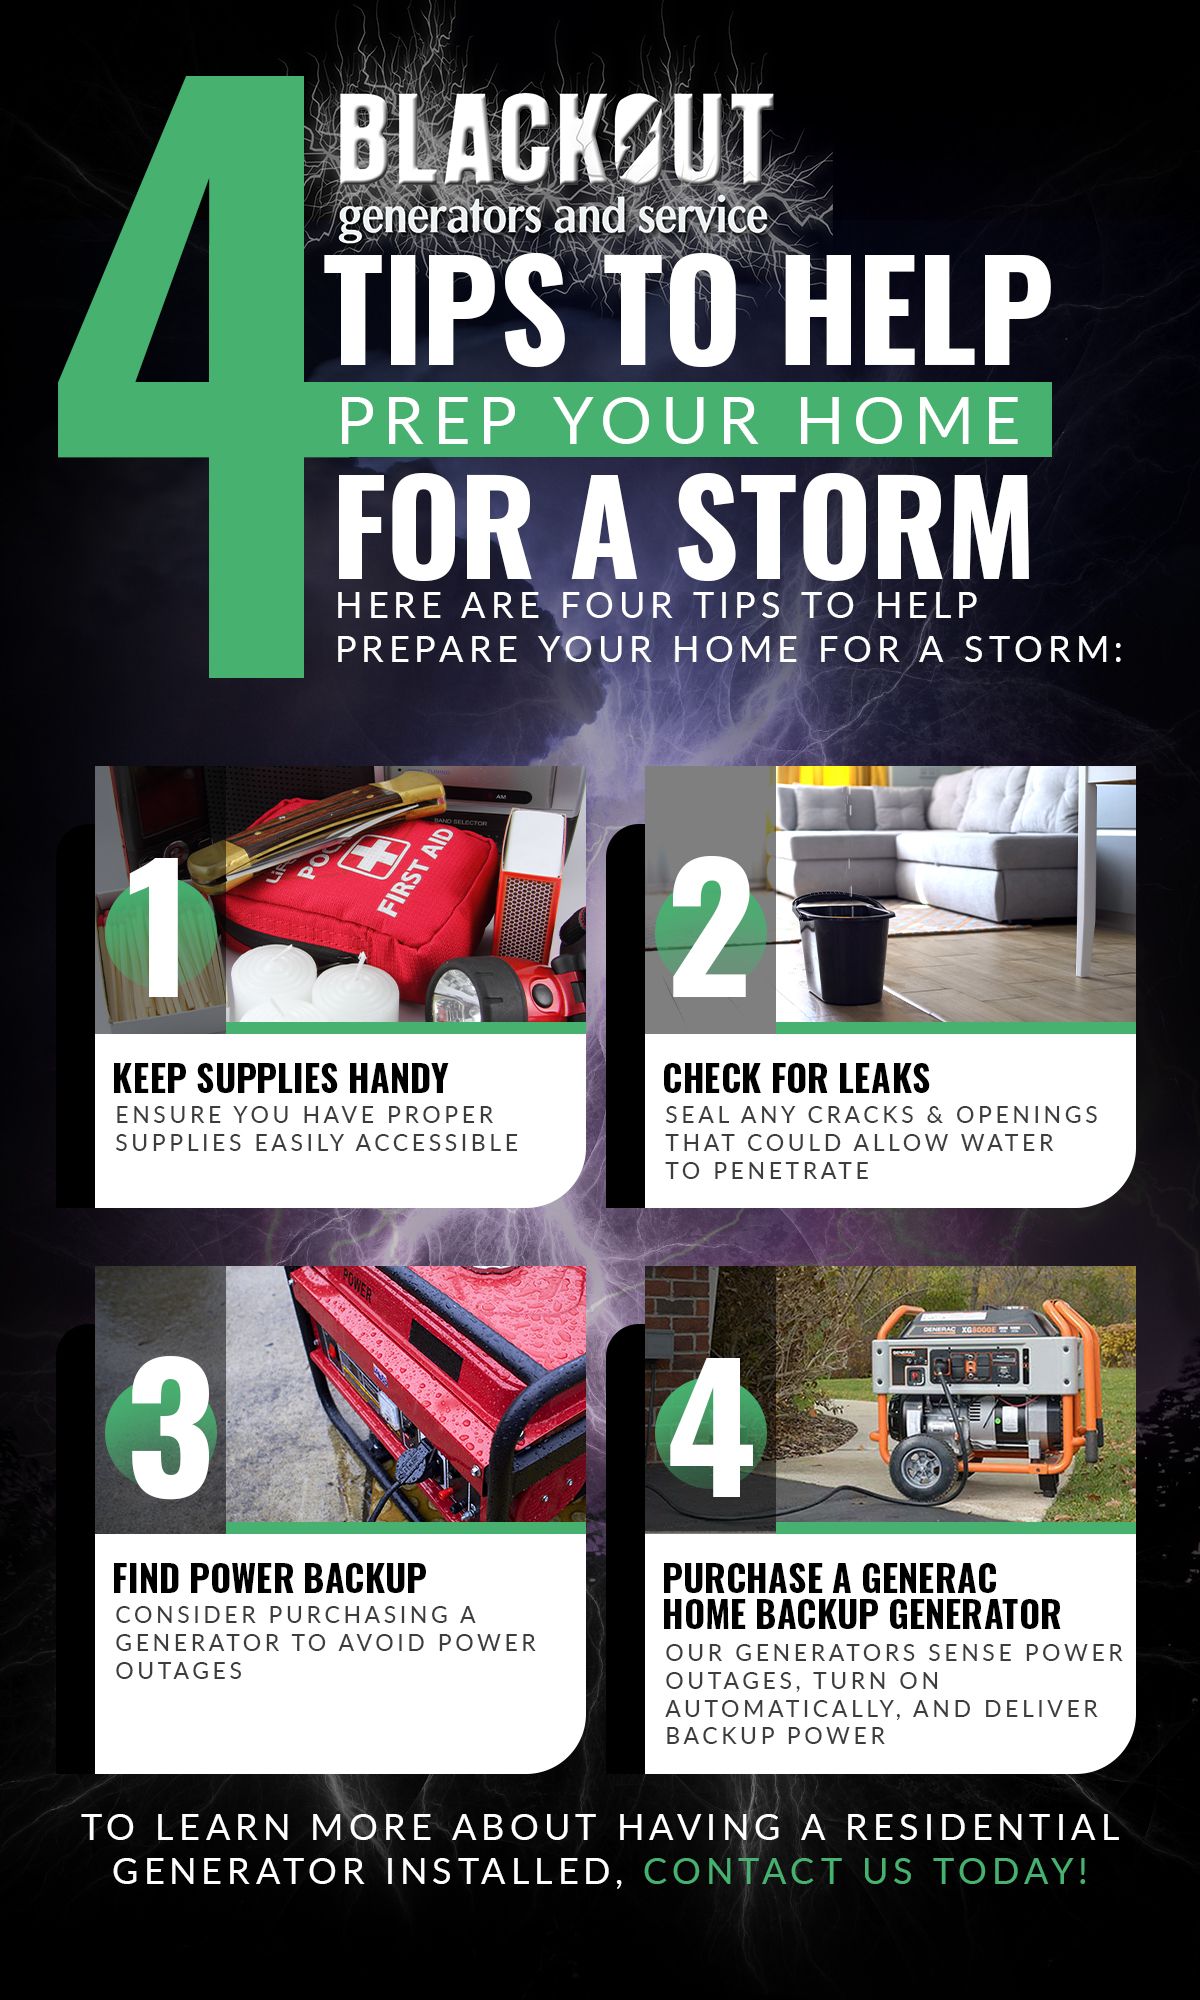 4 tips to help prep your home for a storm